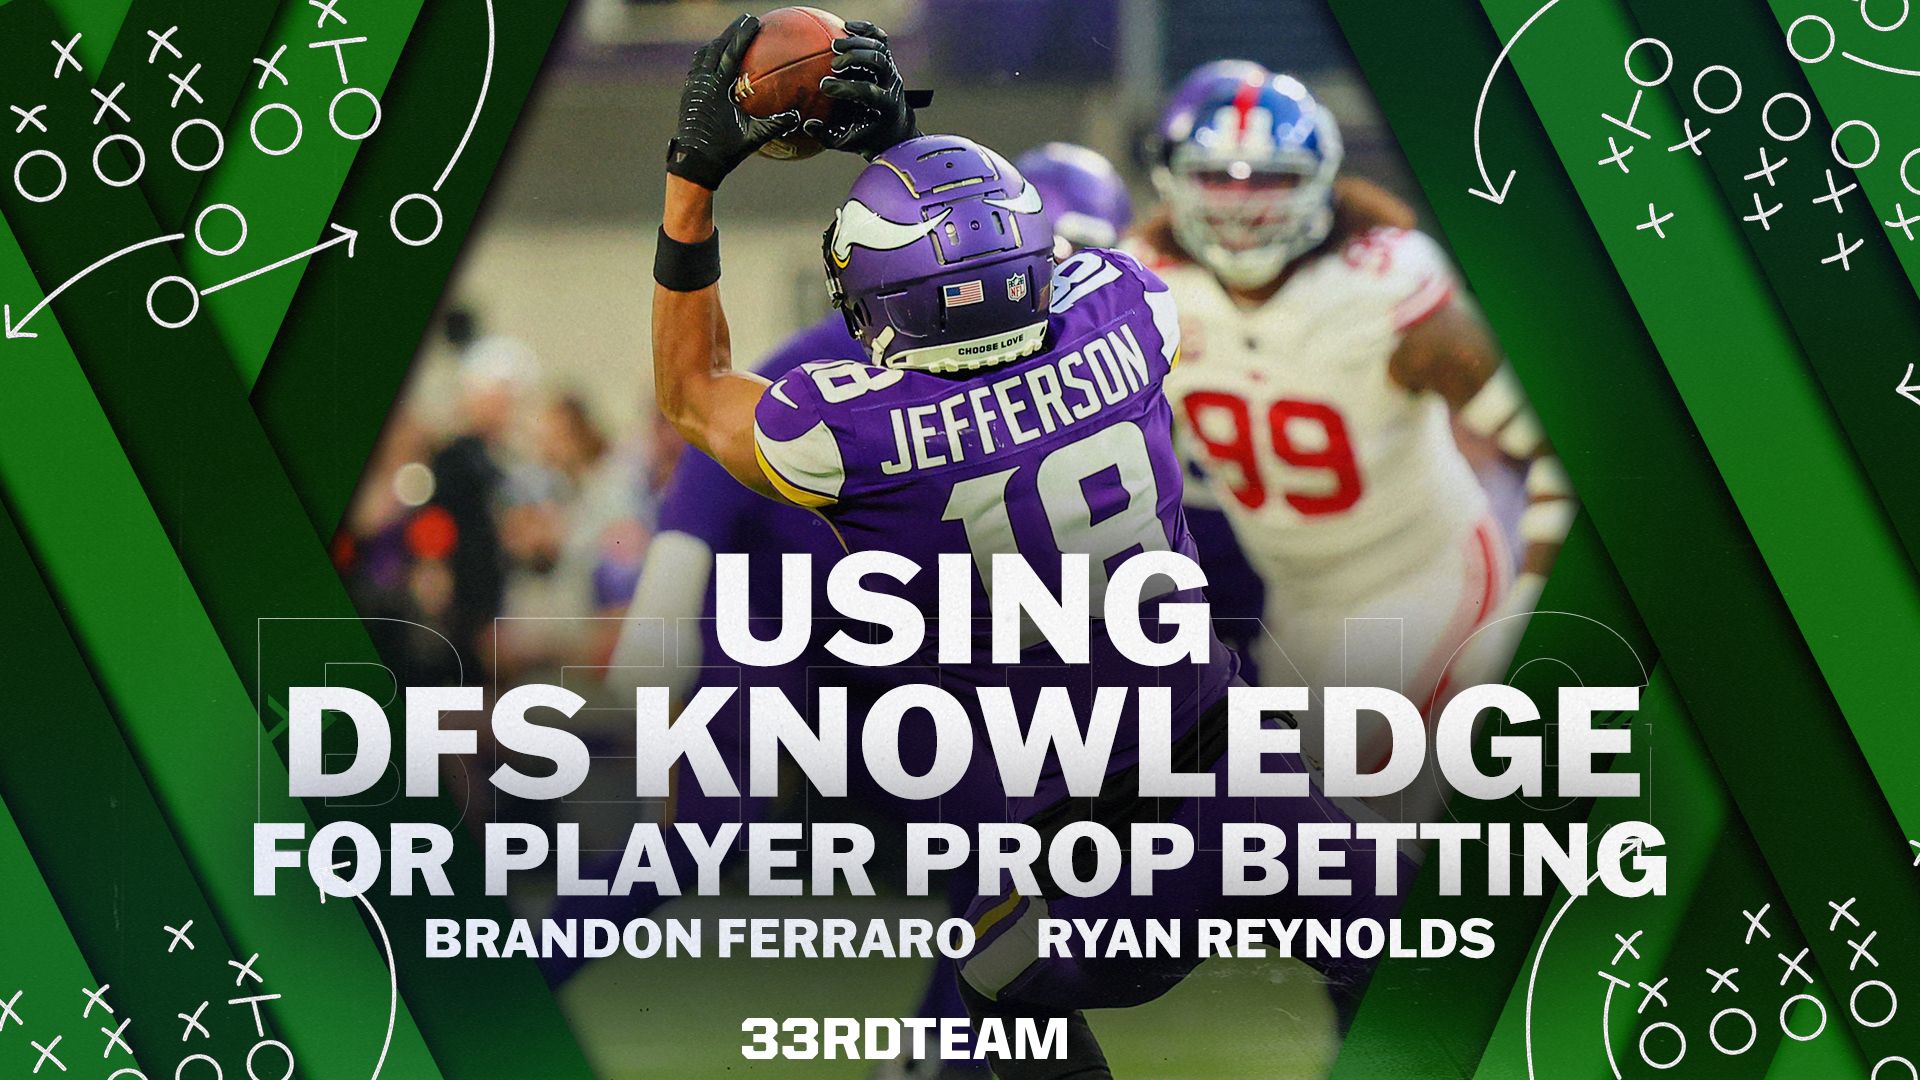 How DFS Players Can Use Their Knowledge For Player Prop Betting